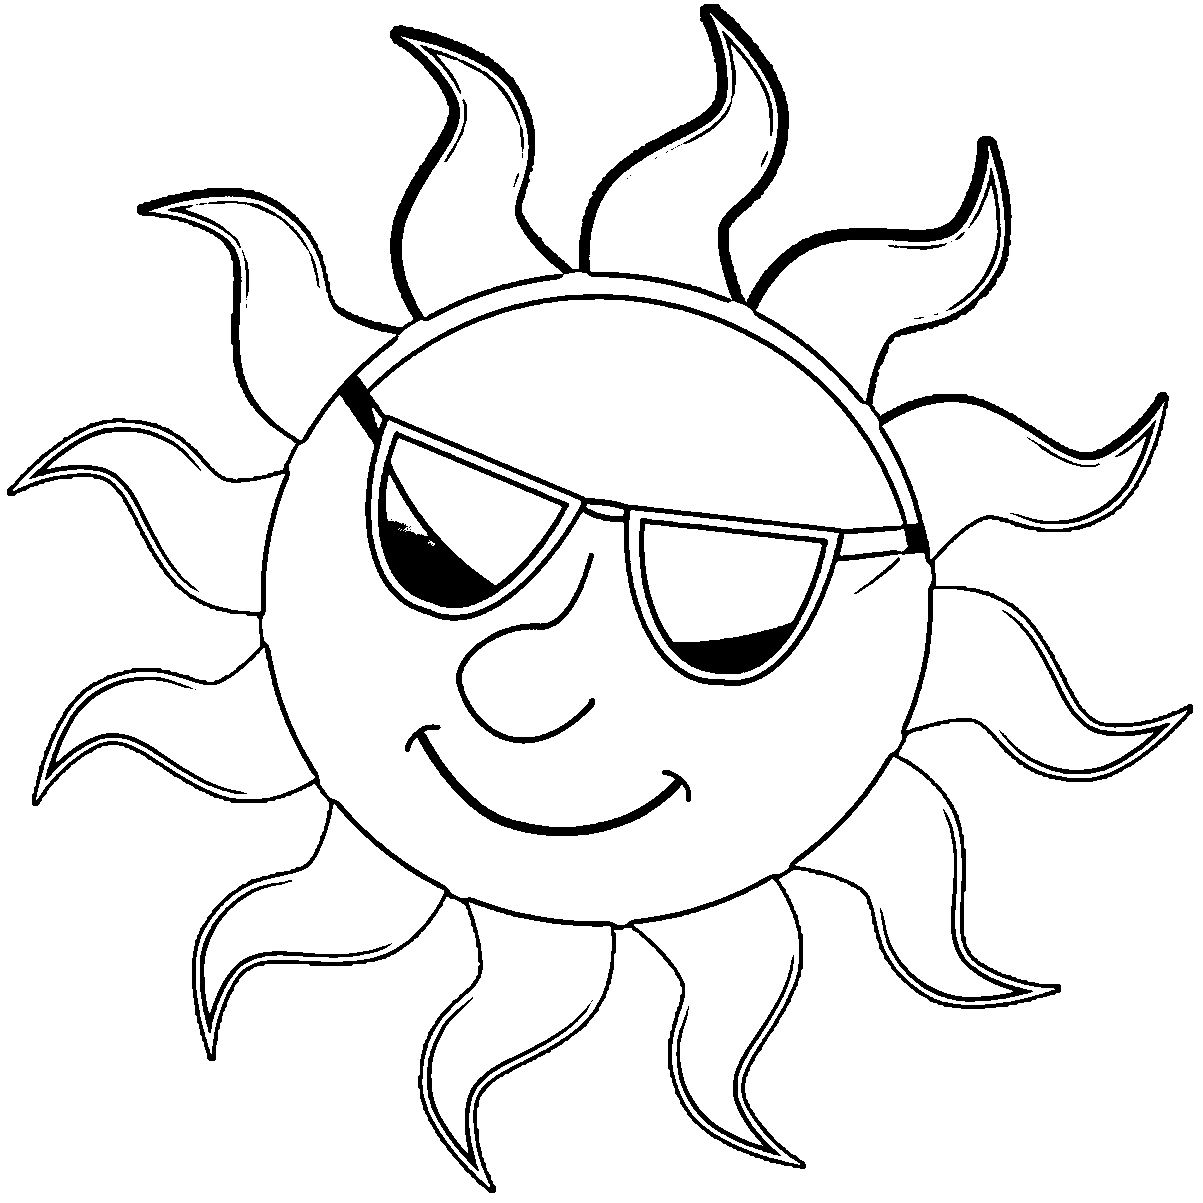 Sun Wearing Sunglasses Summer Coloring Page | Wecoloringpage